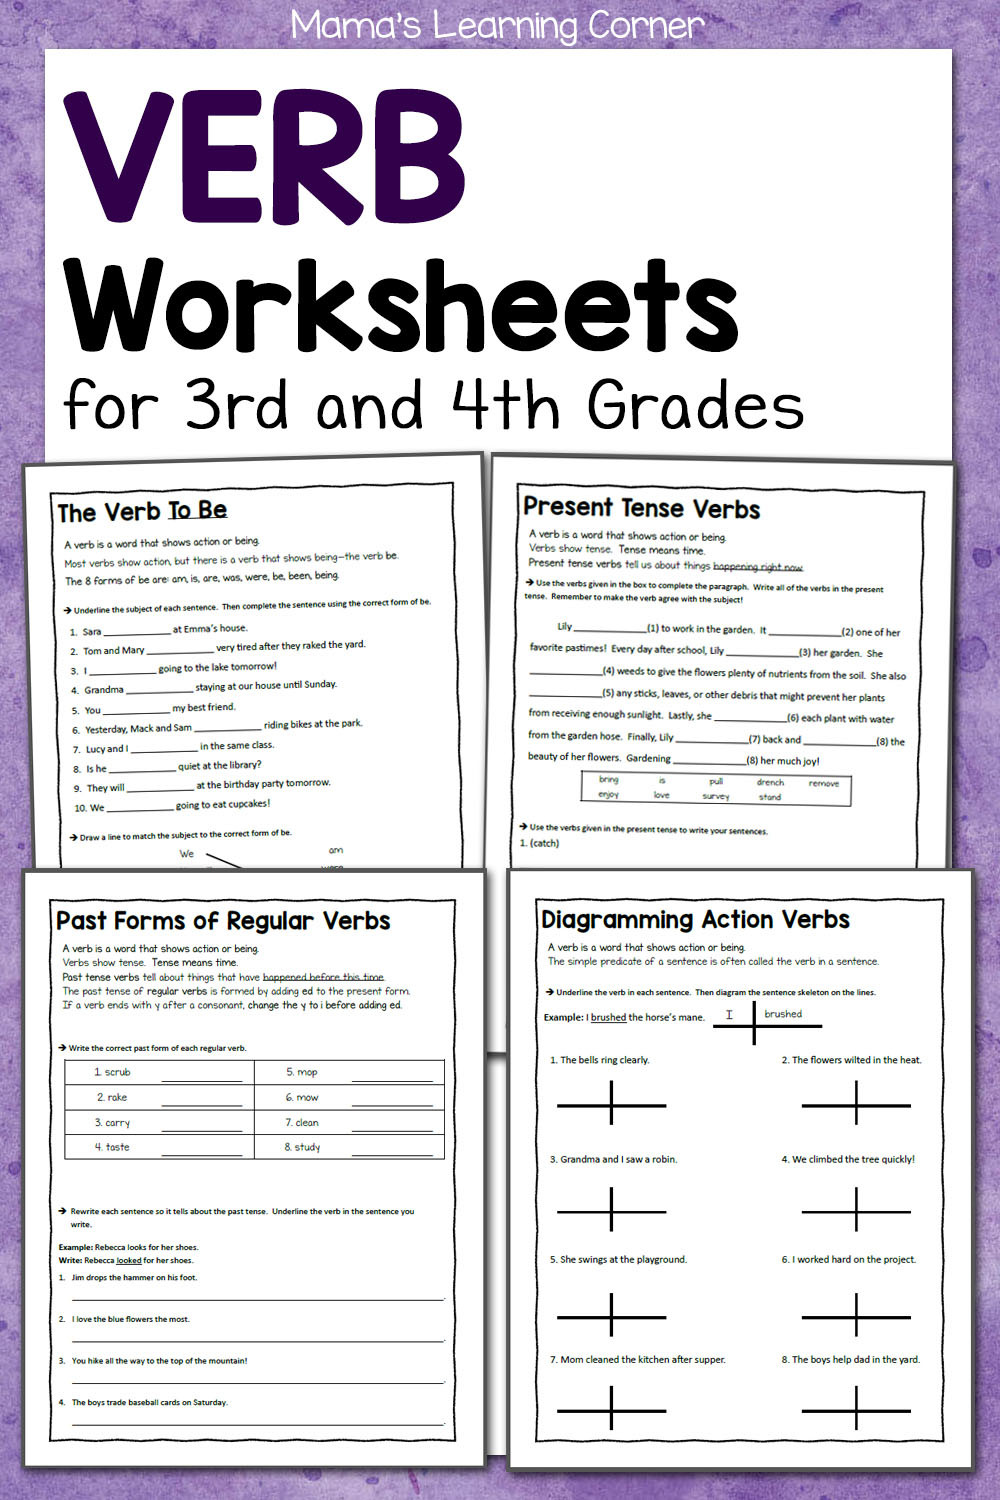 3rd Grade Verb Tense Worksheets Verb Worksheets for 3rd and 4th Grades Mamas Learning Corner